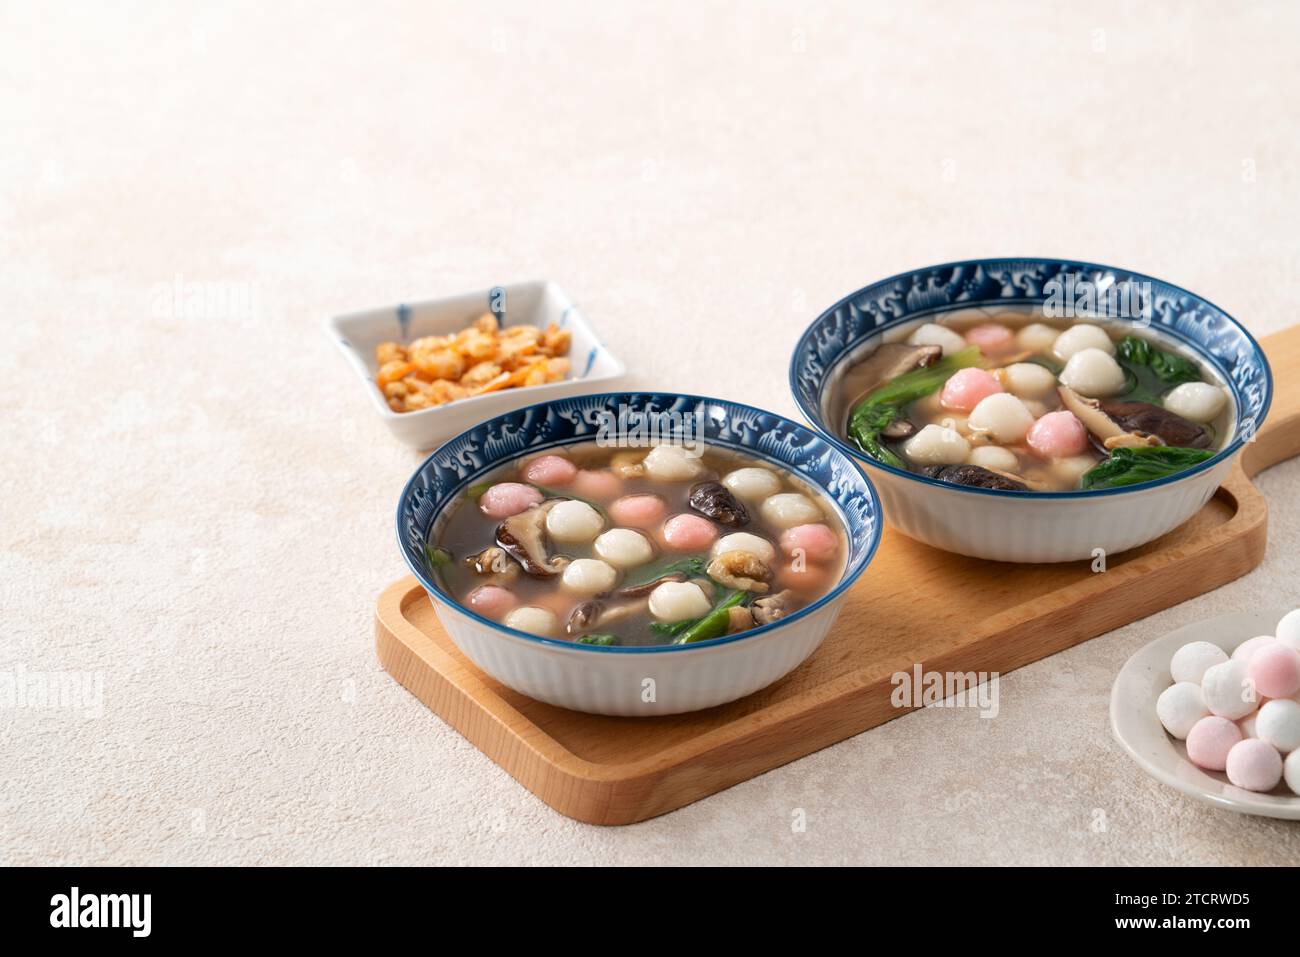 Eating red and white small tangyuan, tang yuan, glutinous rice dumpling balls with savory soup in a bowl on white table background. Stock Photo